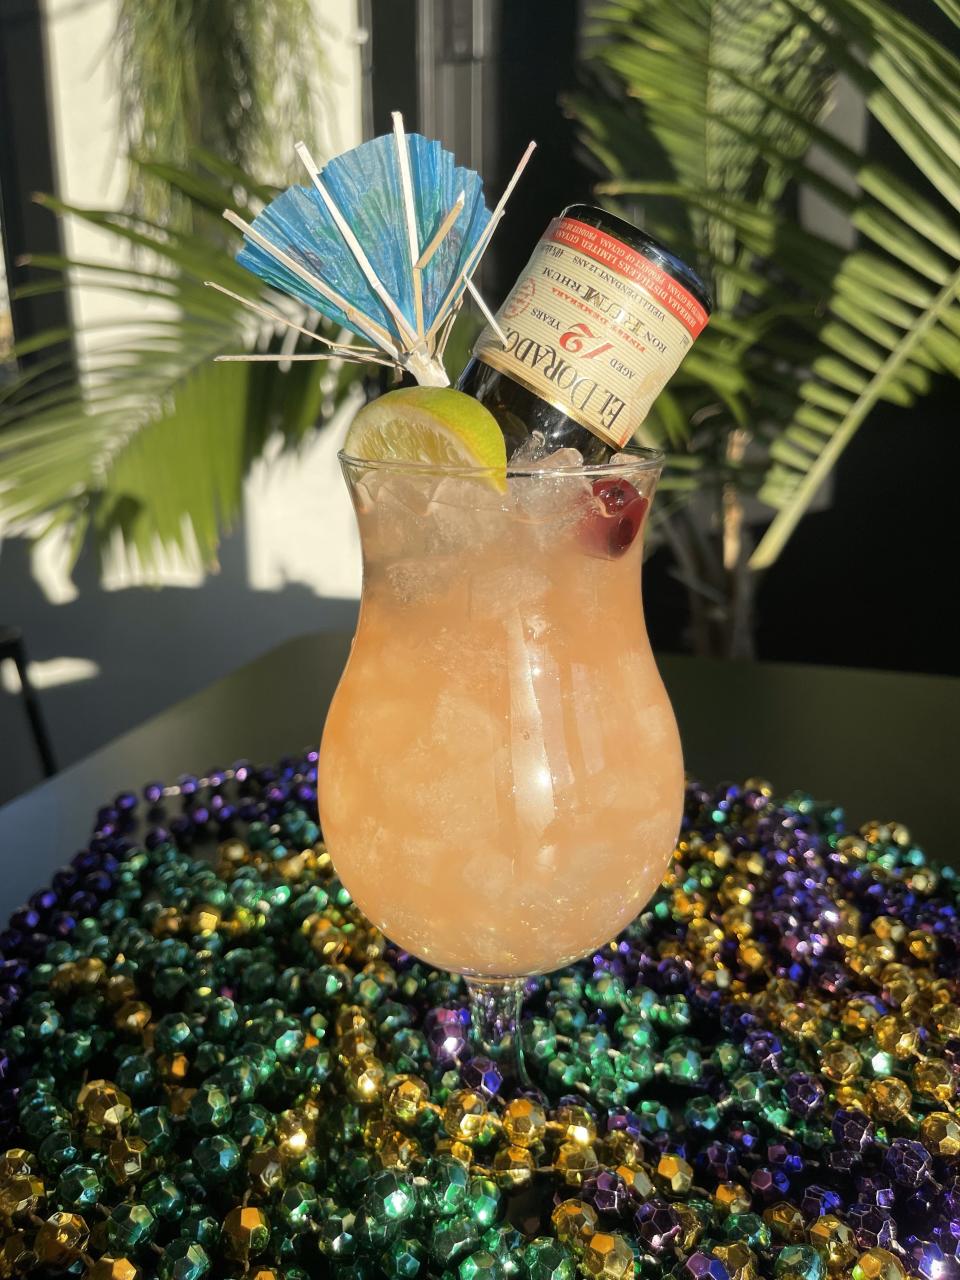 Hurricane cocktails are on the Mardi Gras menu at R Bar in Asbury Park.